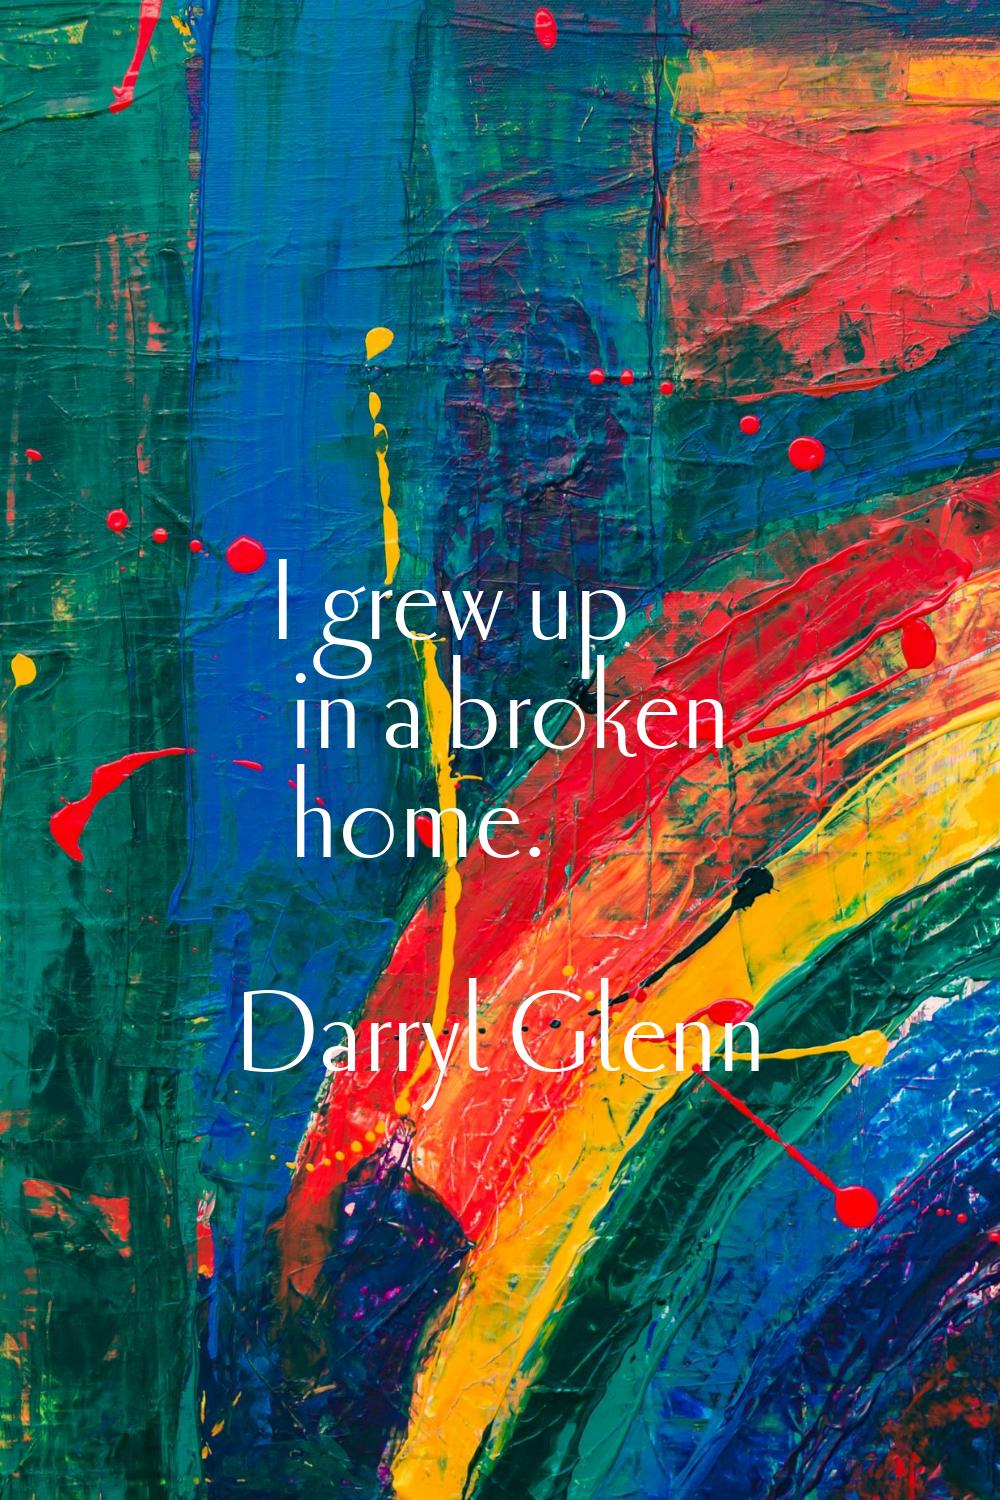 I grew up in a broken home.